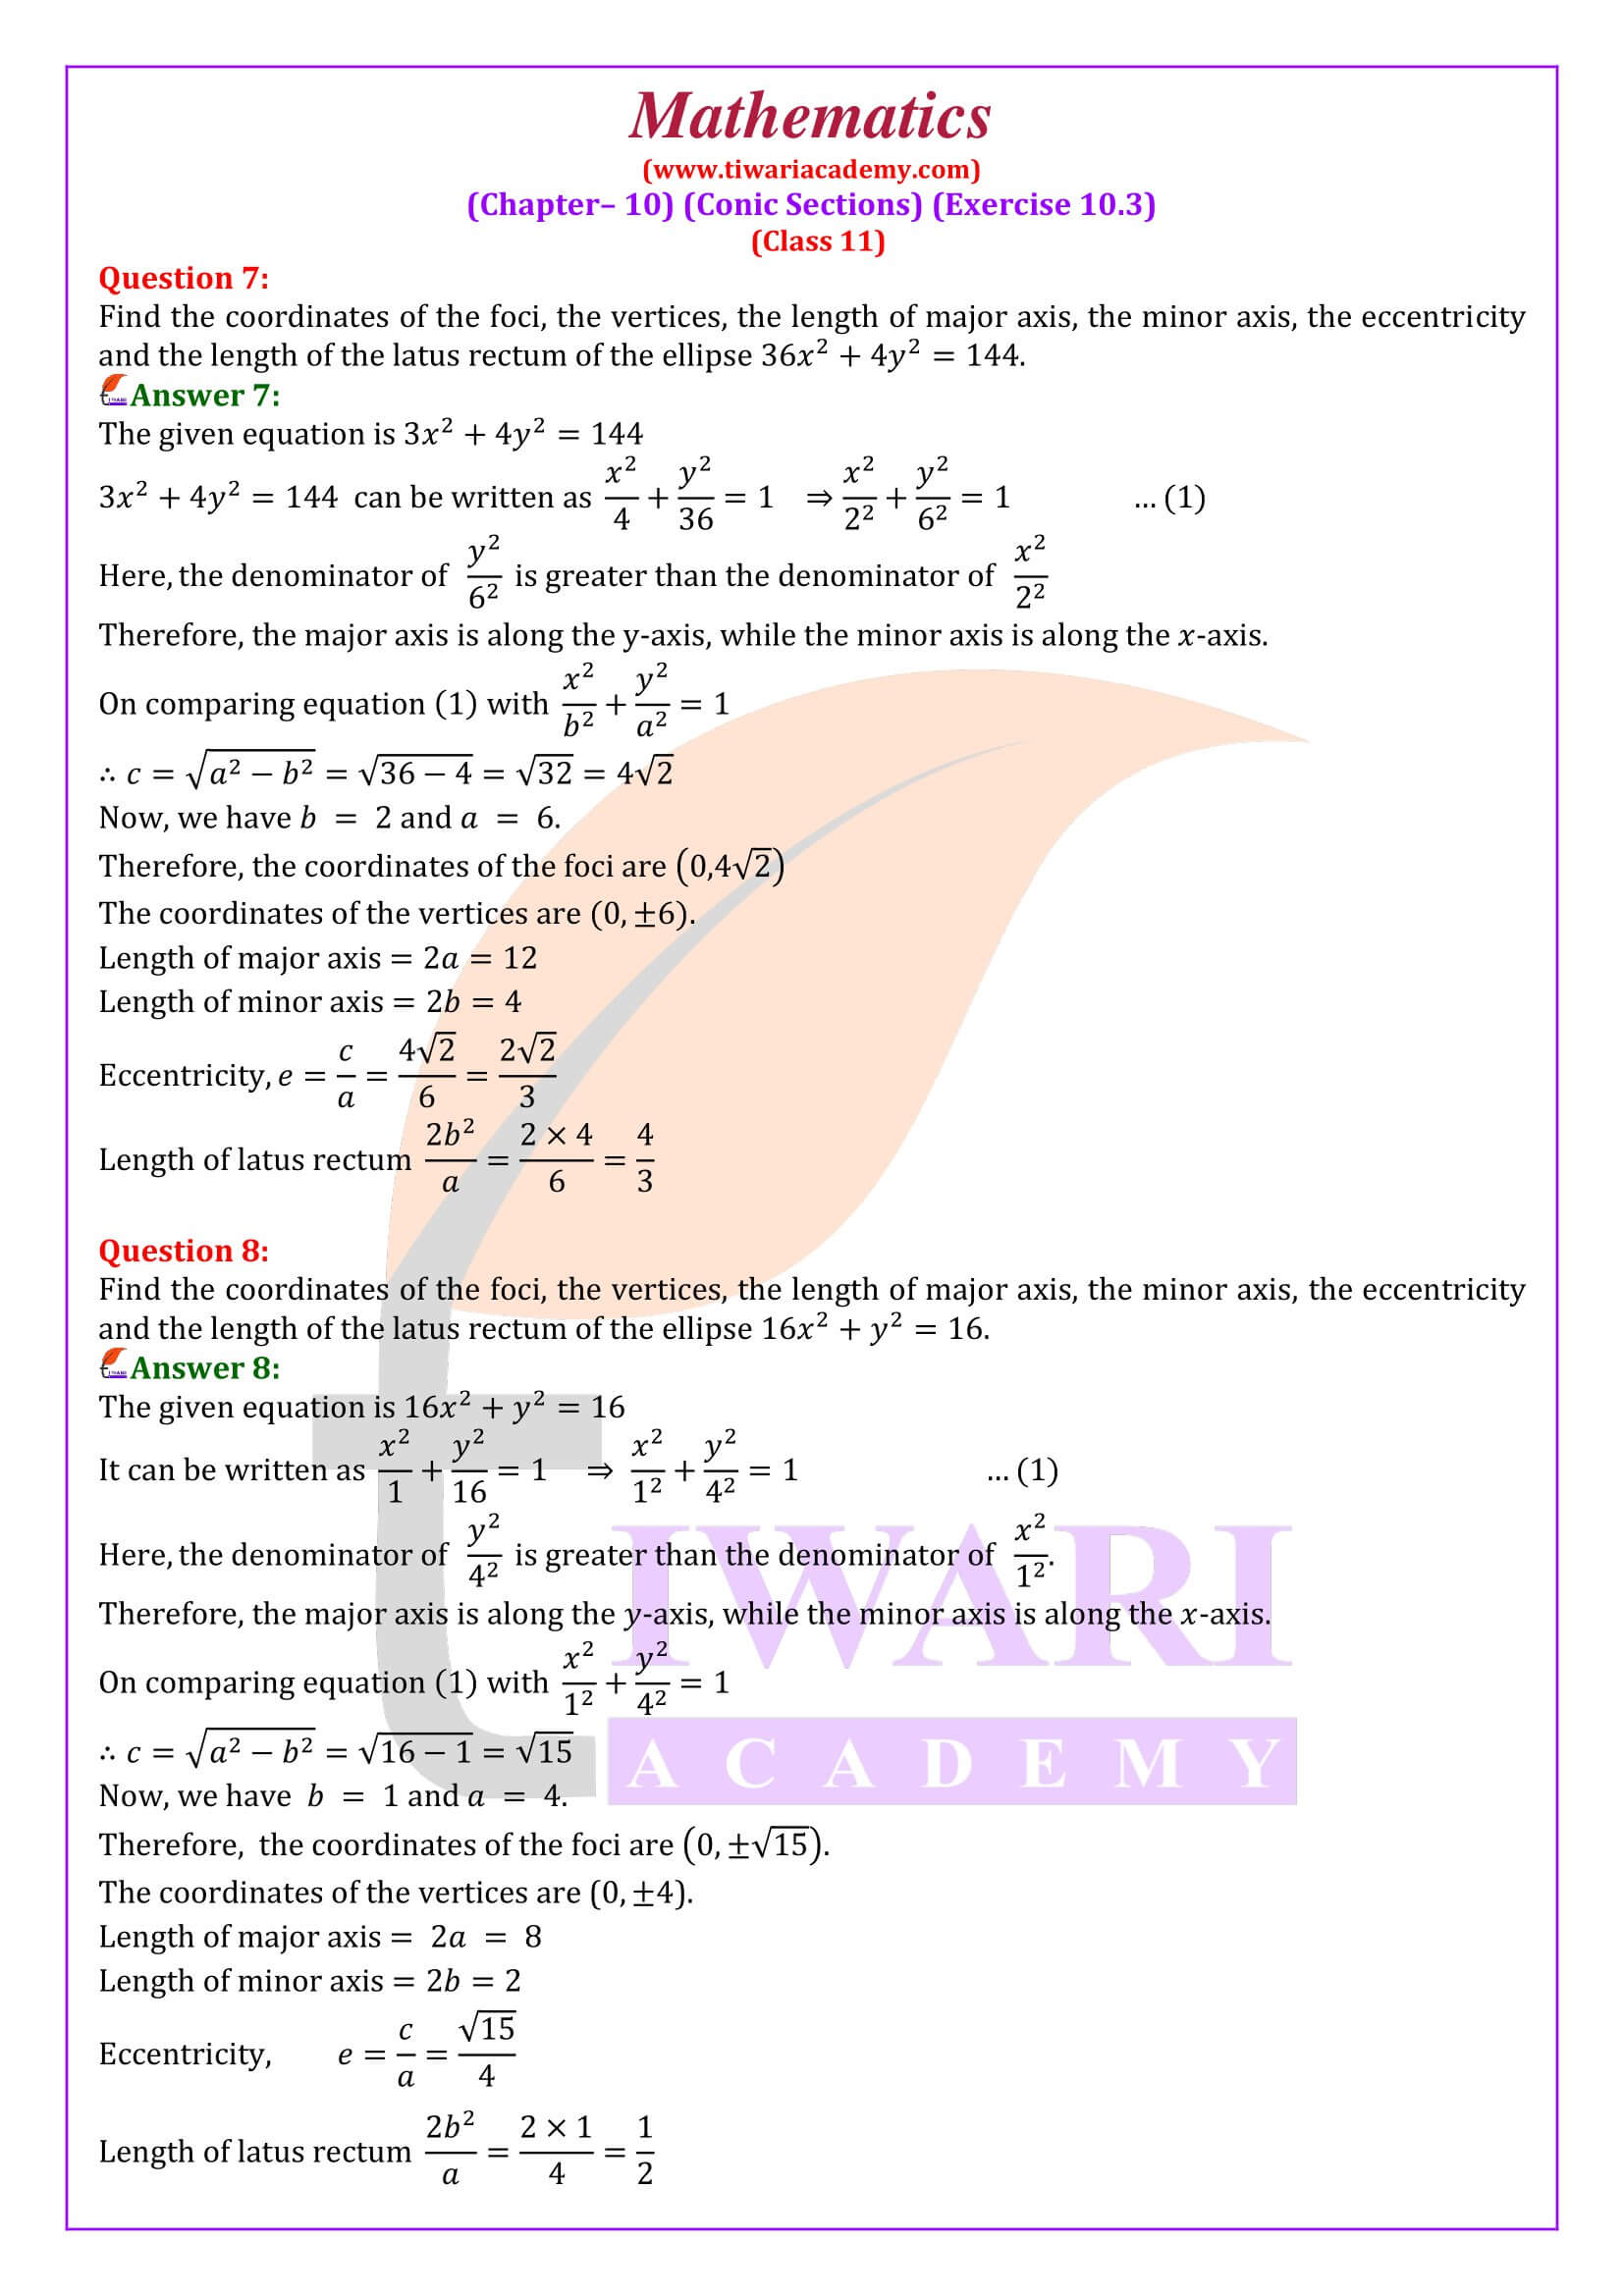 Class 11 Maths Chapter 10 Exercise 10.3 solutions guide